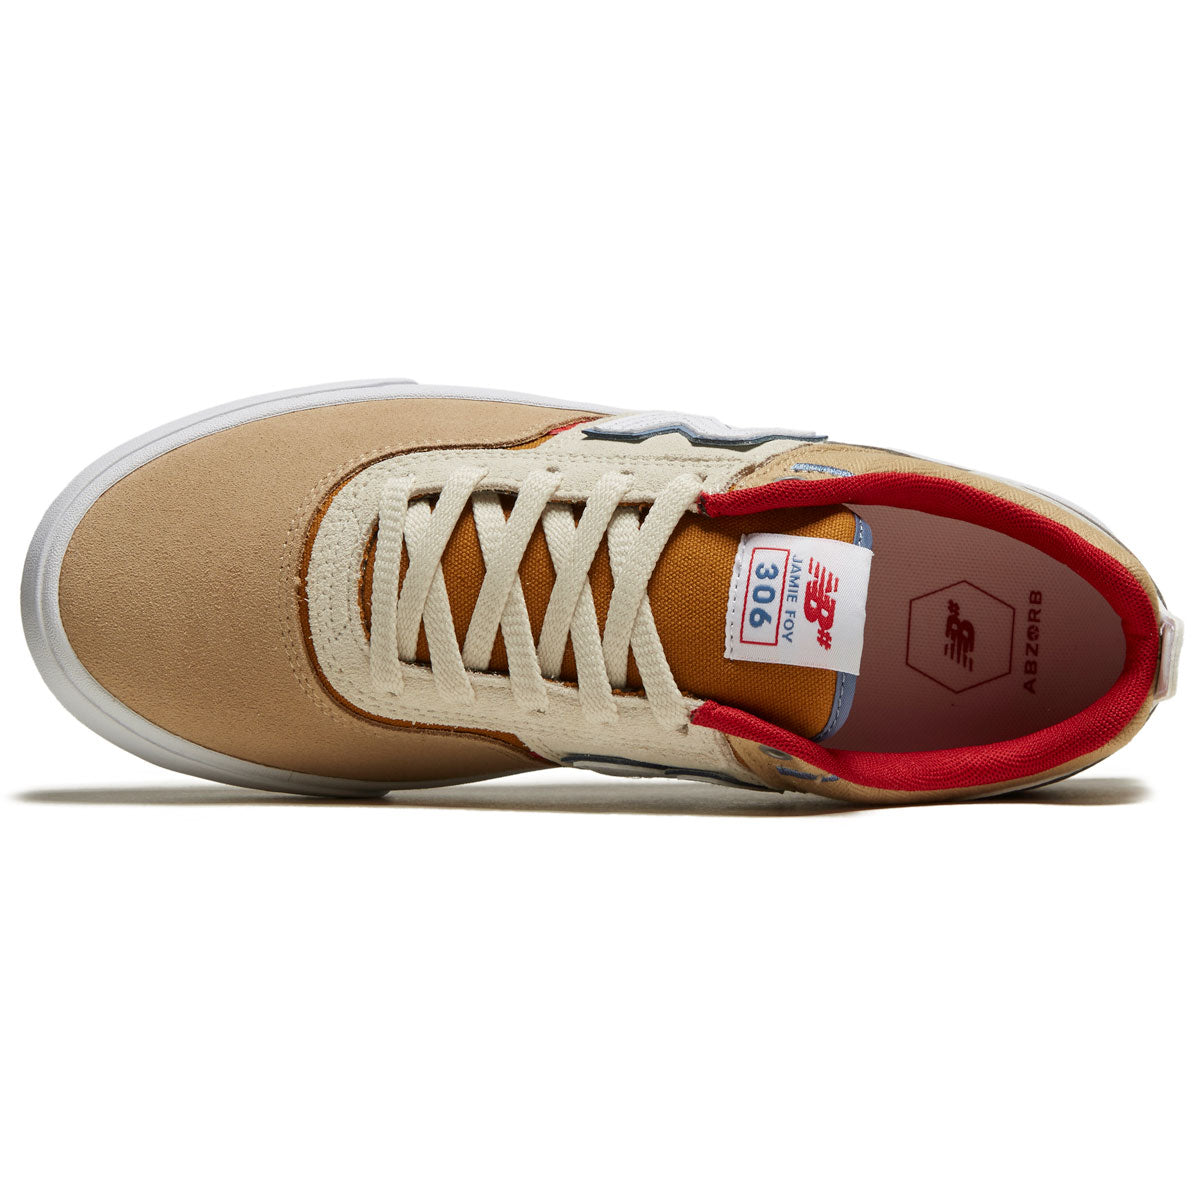 New Balance 306 Foy Shoes - Tan/Red image 3